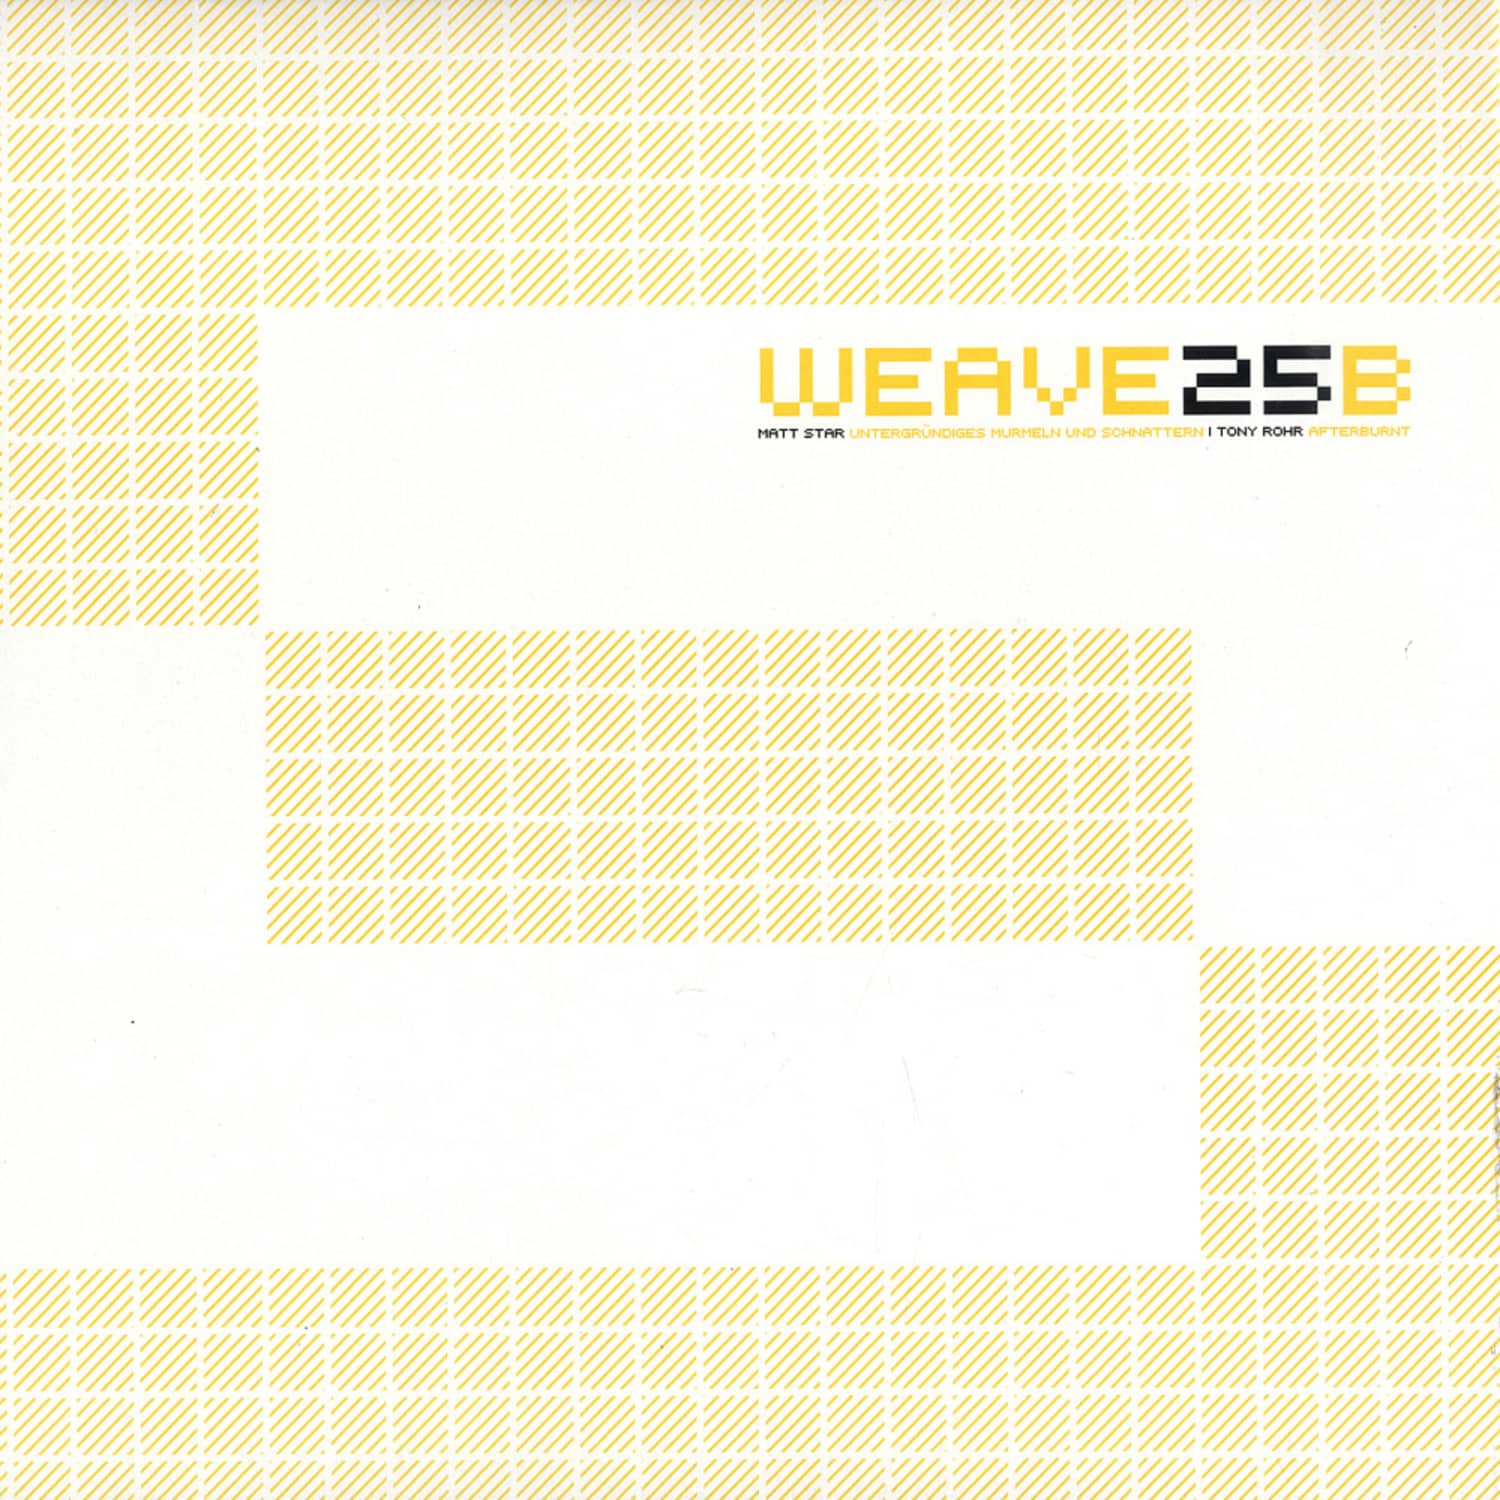 Weave Music Pres - 5 YEARS PART 2